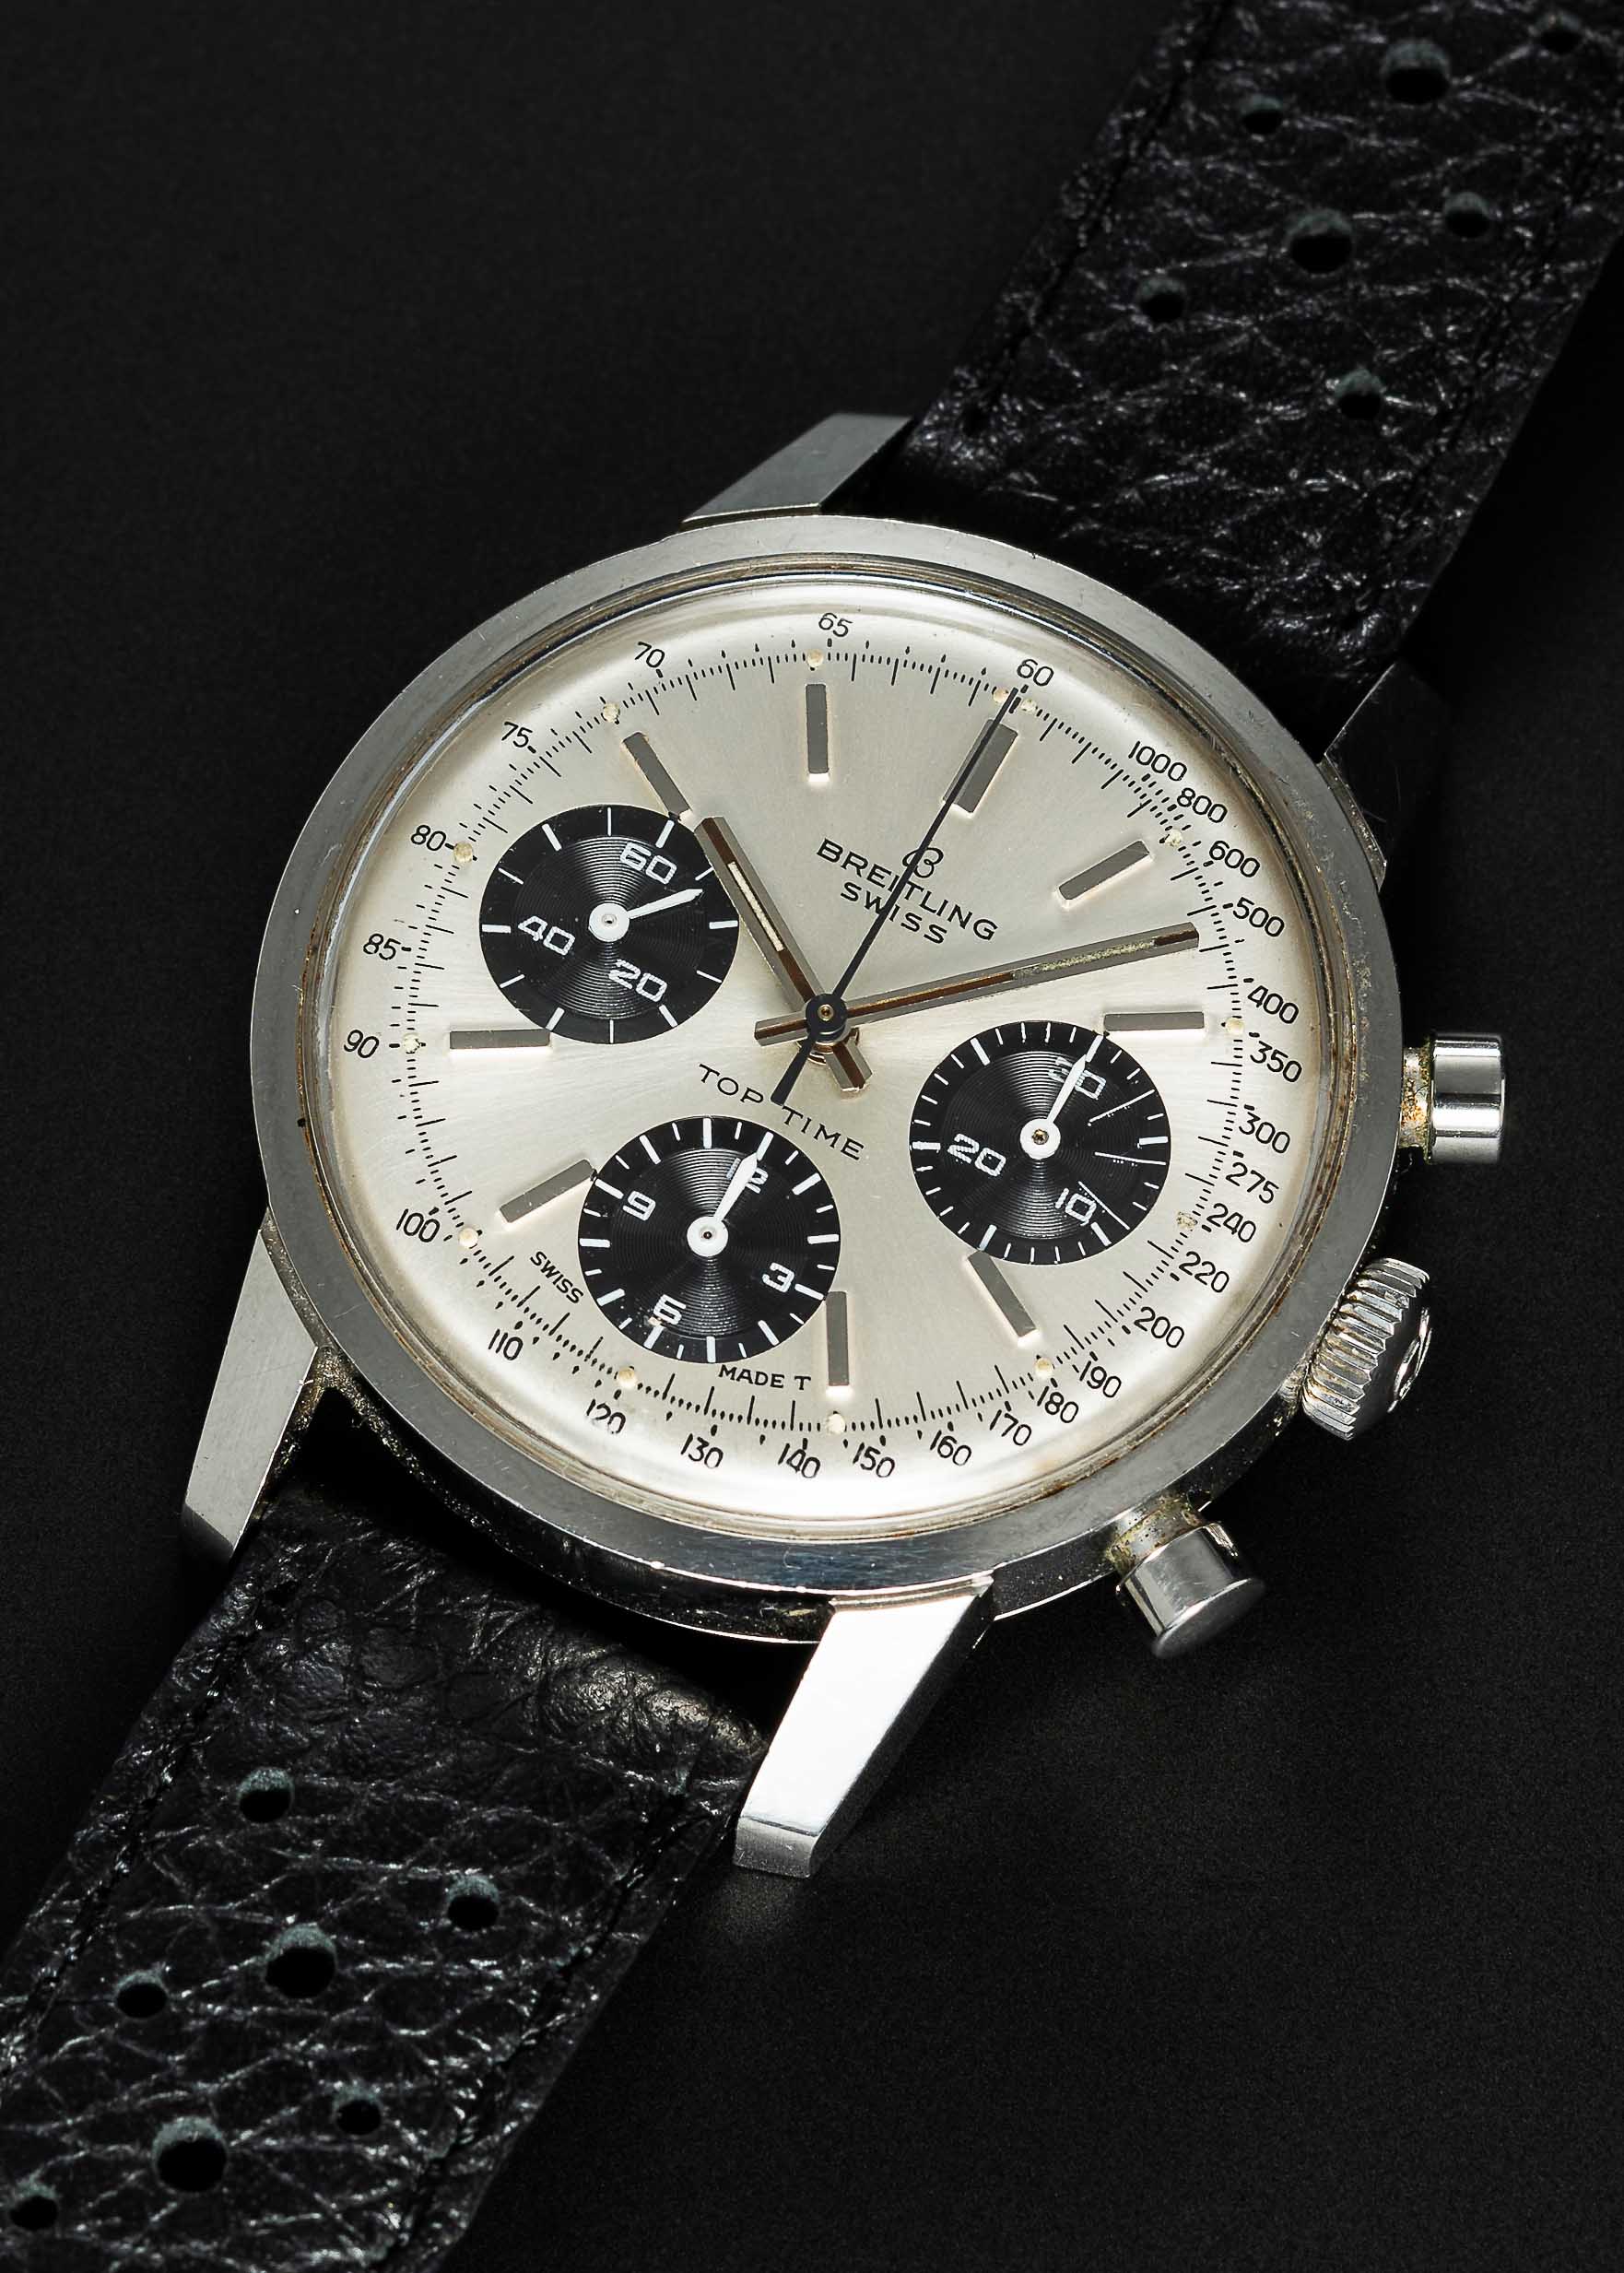 A GENTLEMAN'S STAINLESS STEEL BREITLING TOP TIME CHRONOGRAPH WRIST WATCH CIRCA 1967, REF. 810